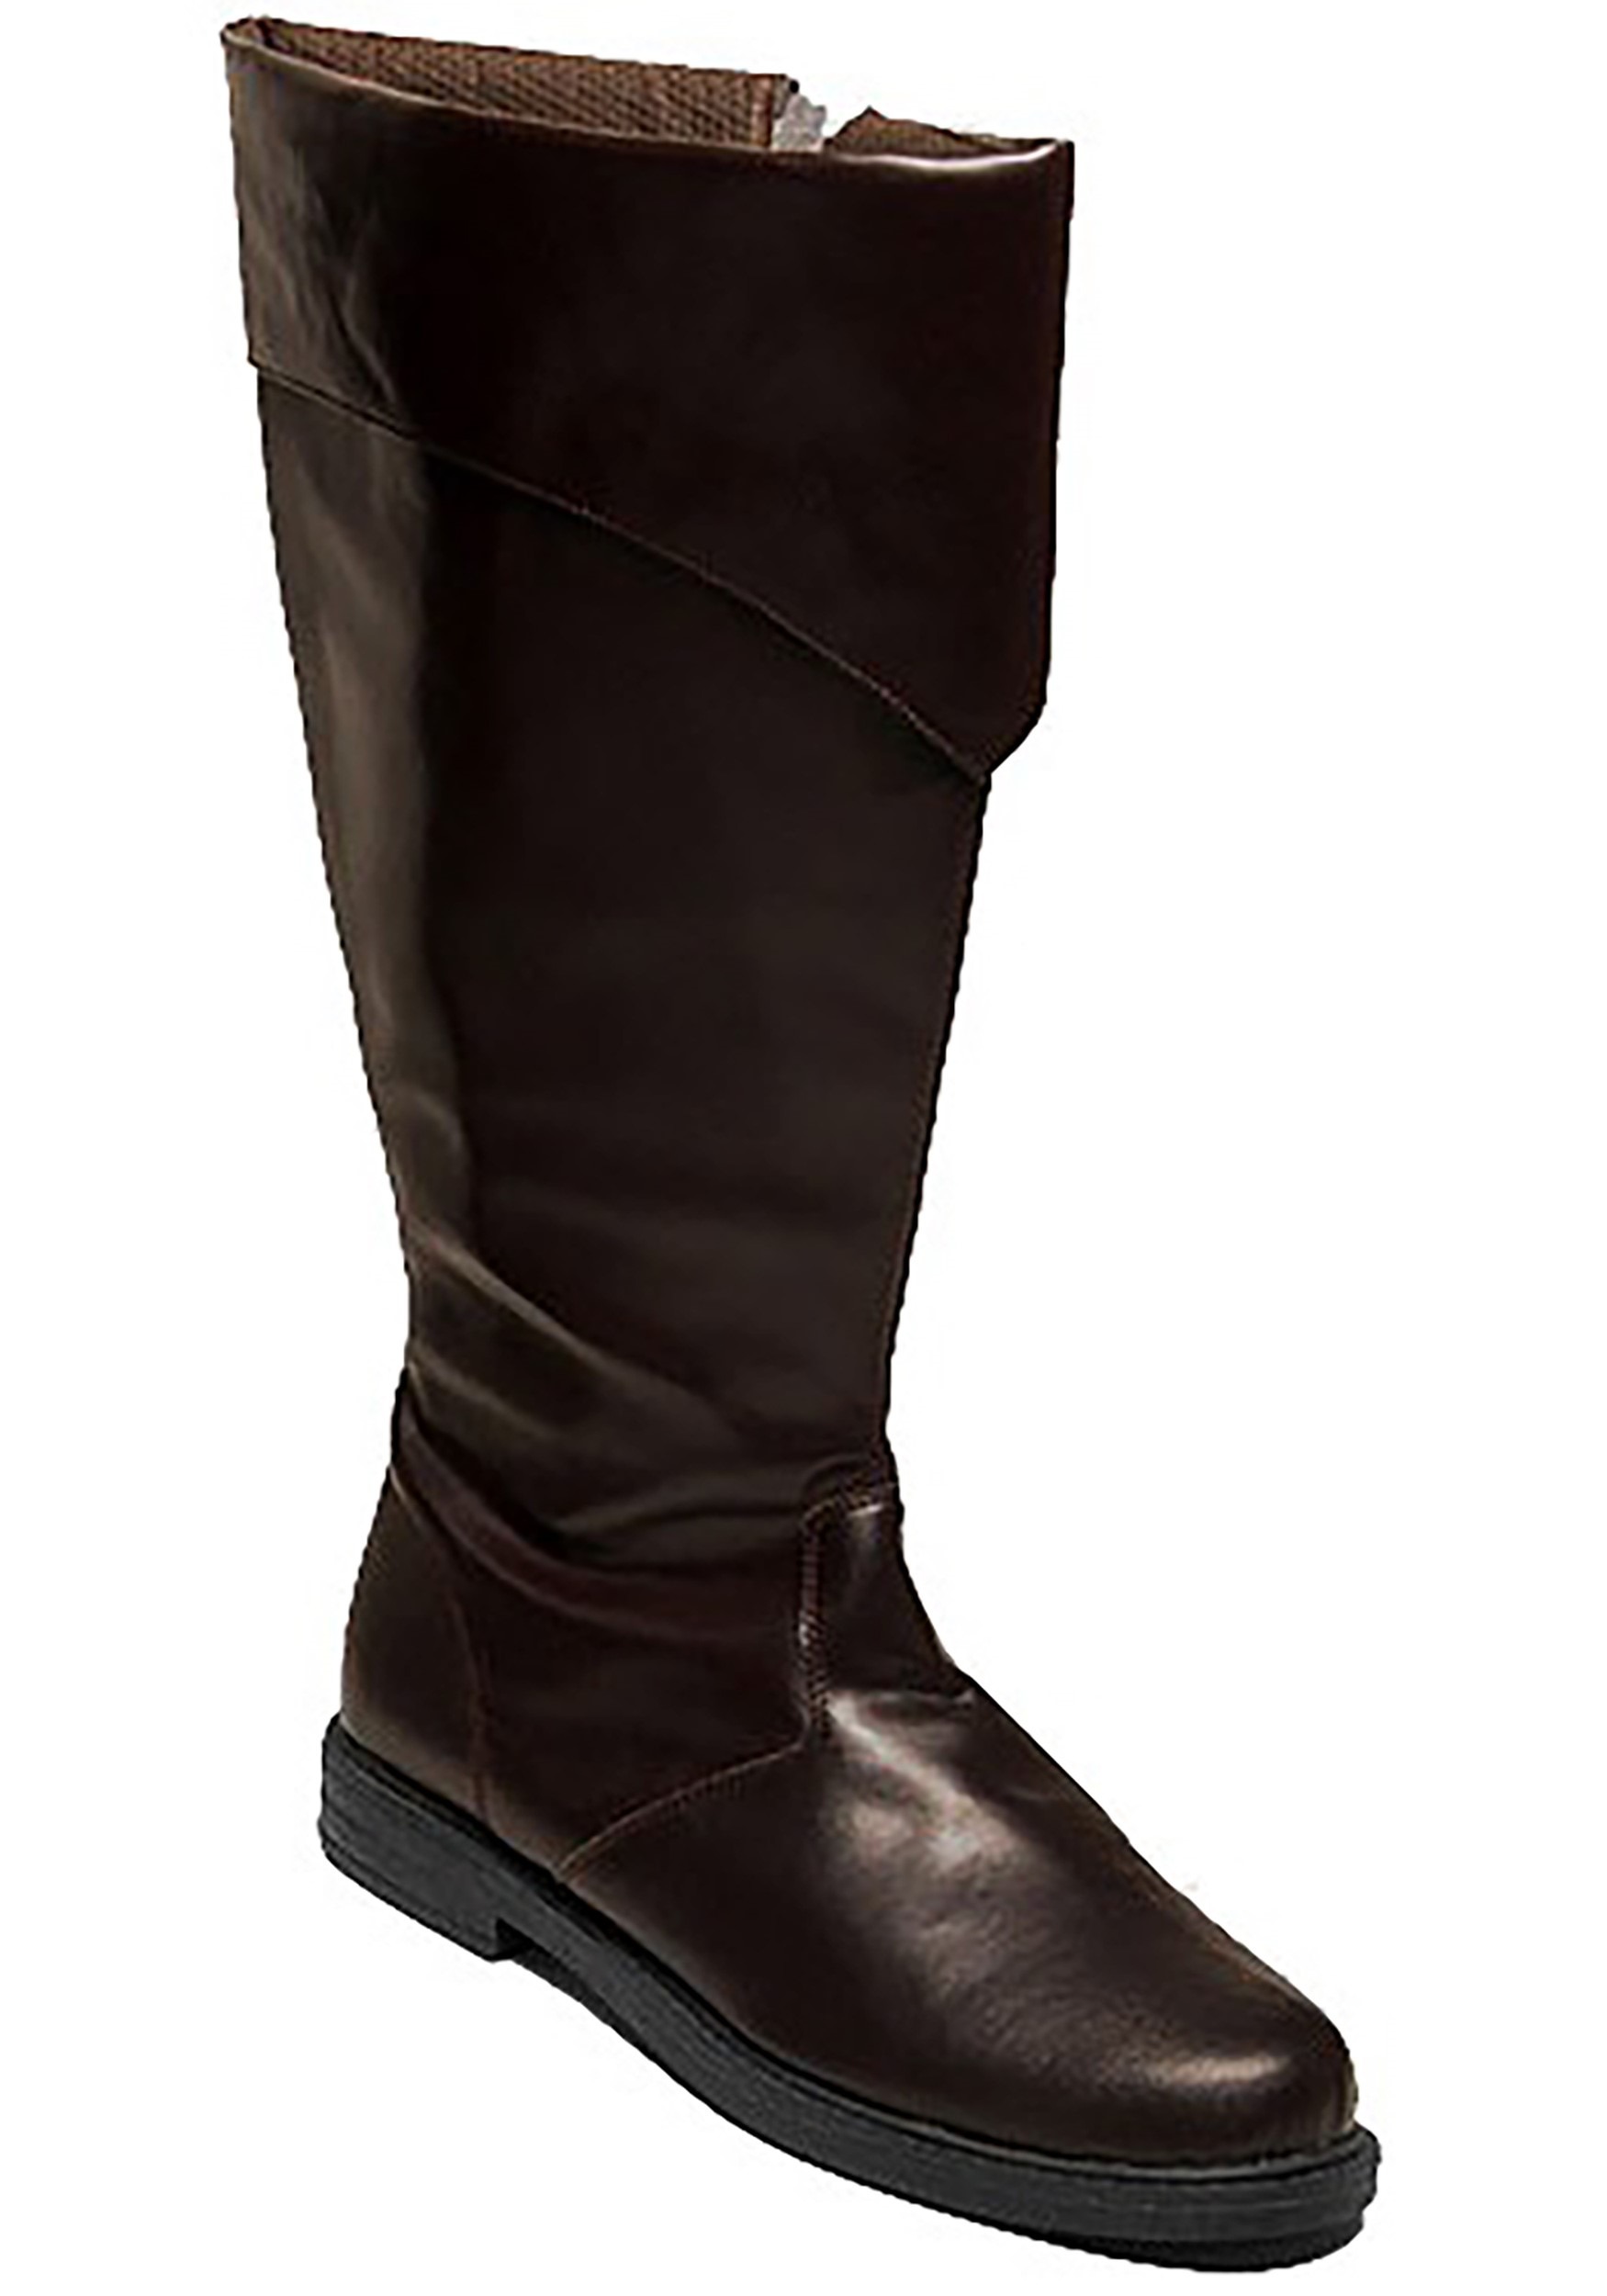 Mens Tall Brown Costume Boots